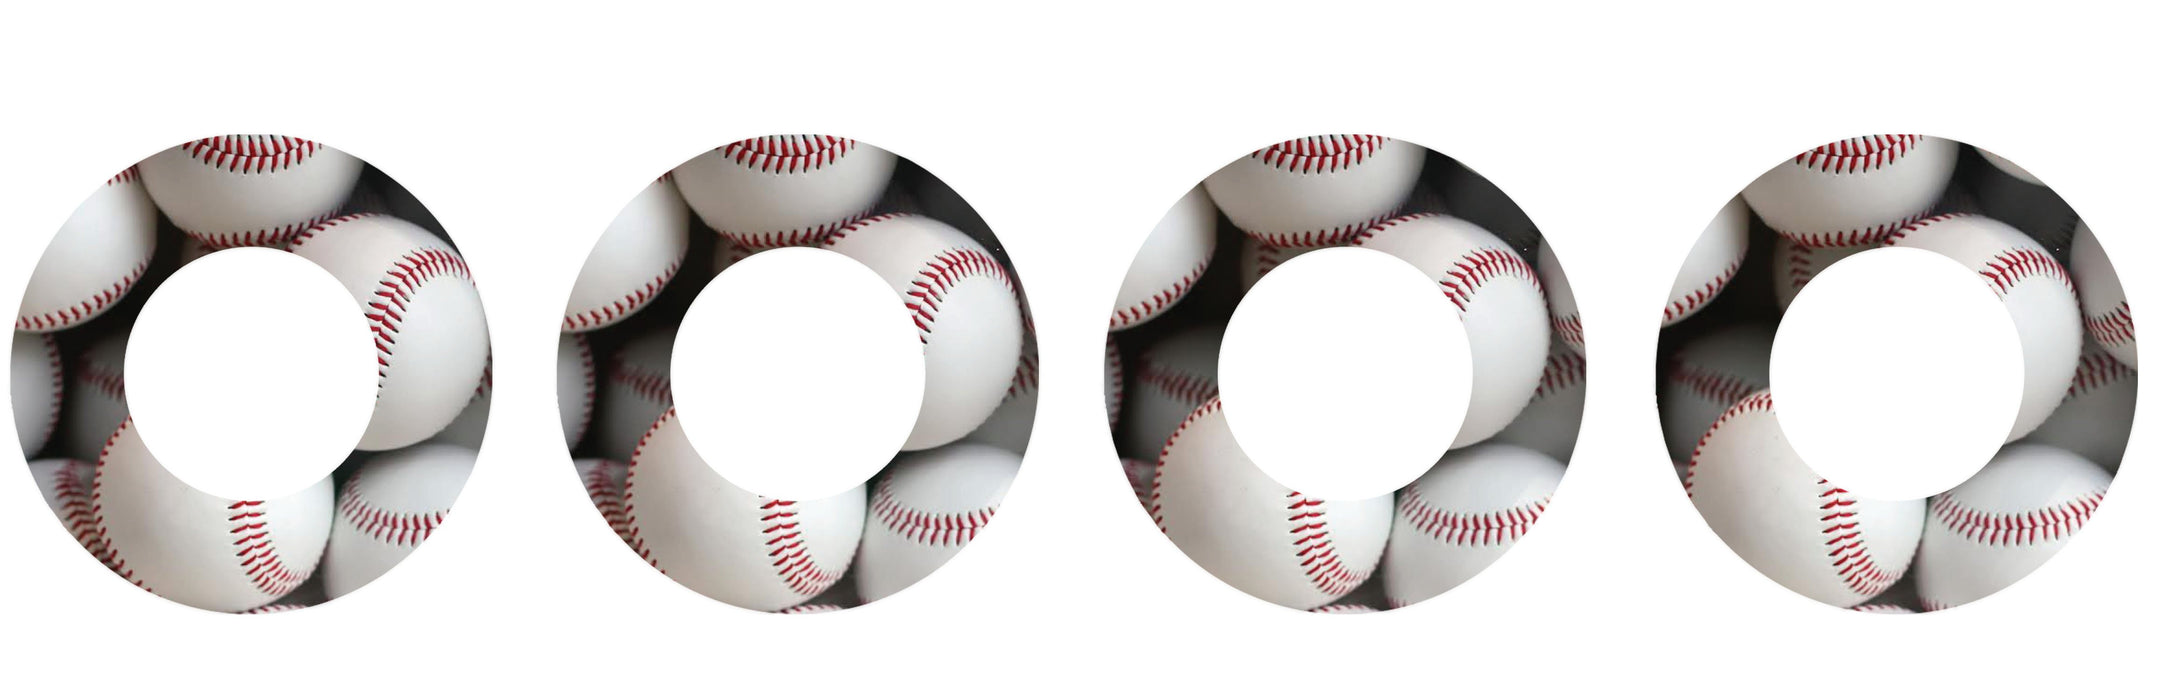 Baseball Pattern For Patch+ Freestyle Libre And Universal Infusion Set Tape 4-Pack Libre/universal